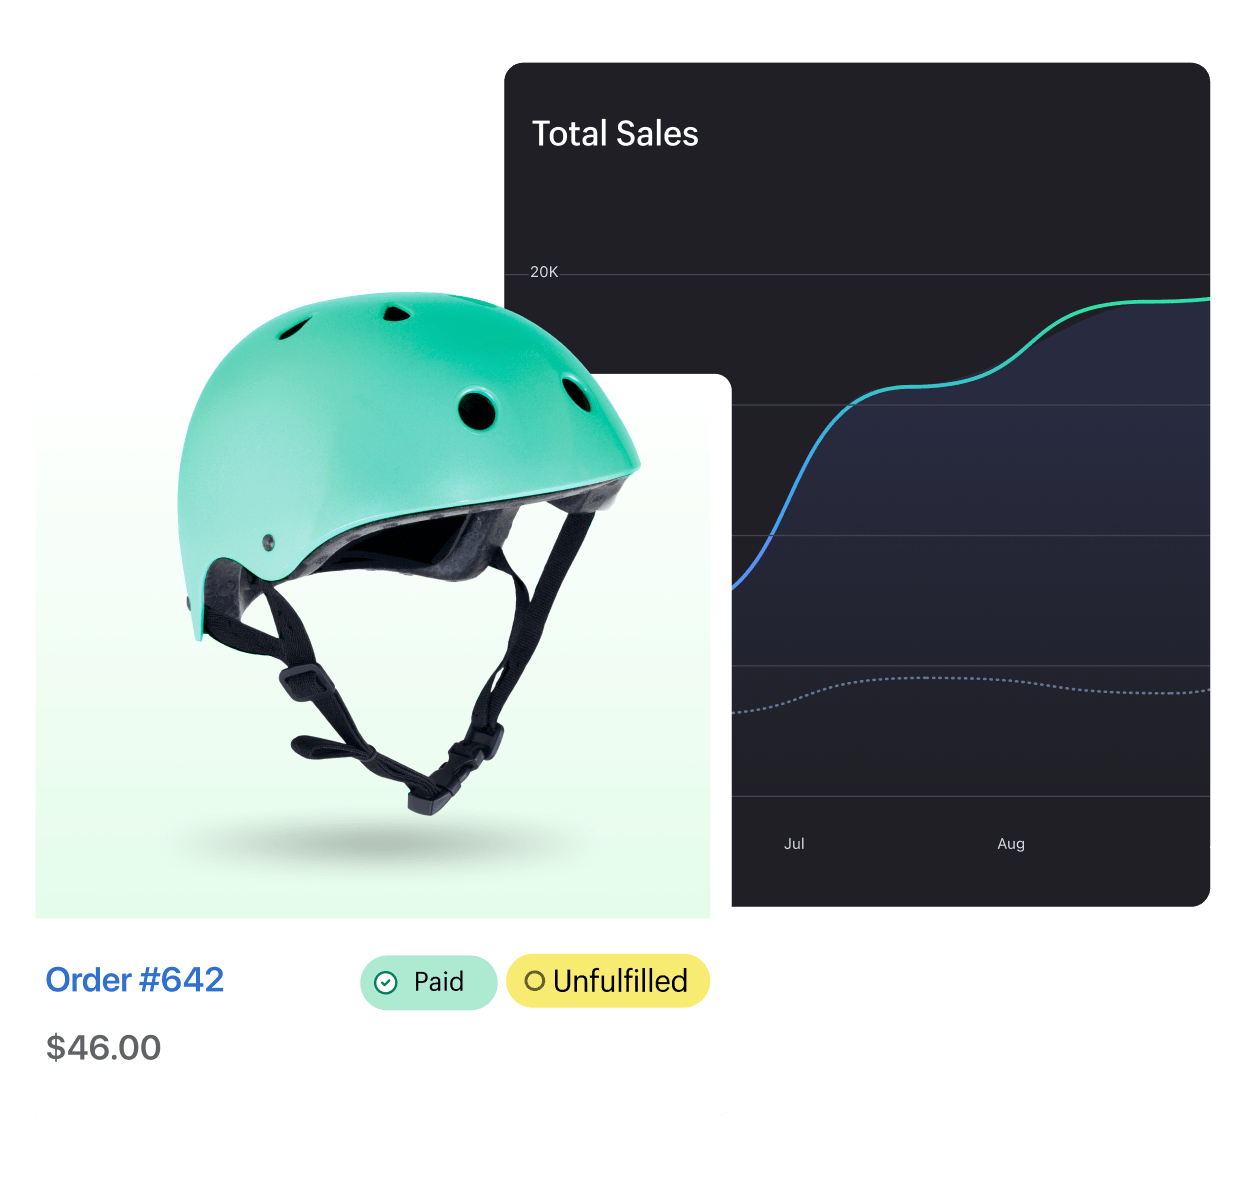 Sample helmet product with Total Sales graph behind it.